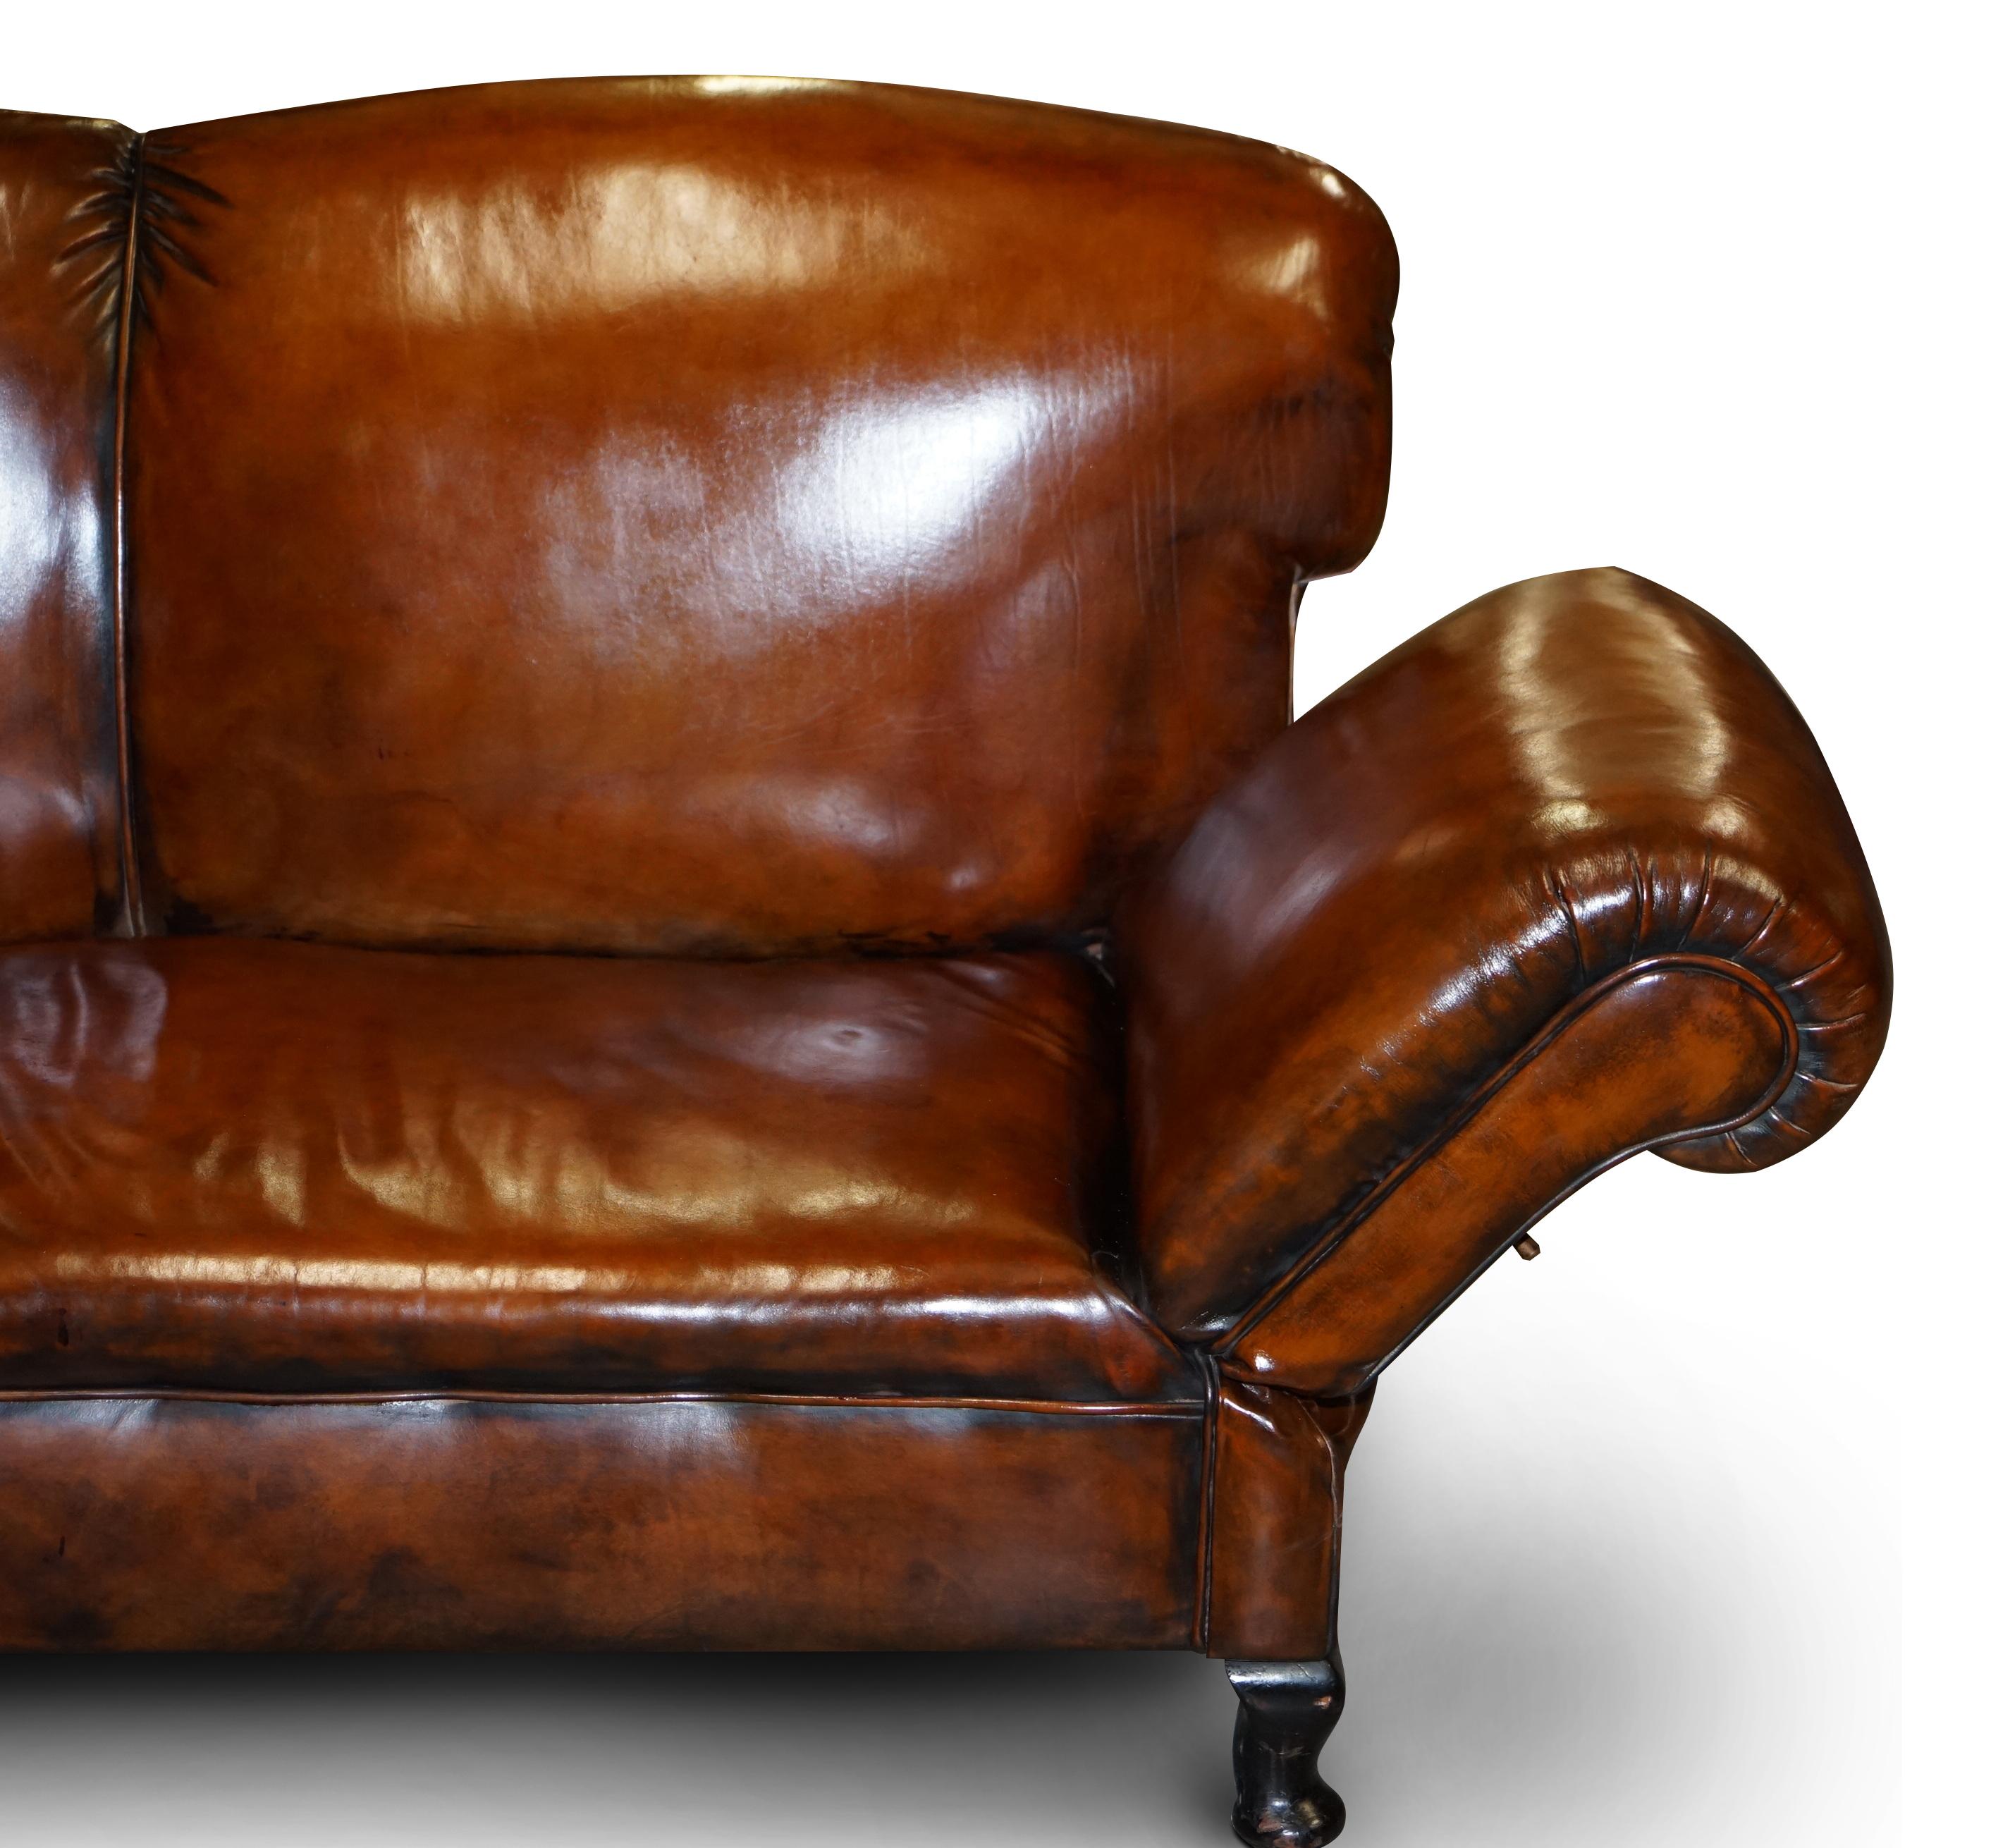 Fully Restored Whisky Brown Leather Drop Arm Chaise Lounge Sofa Horse Hair Fill For Sale 9